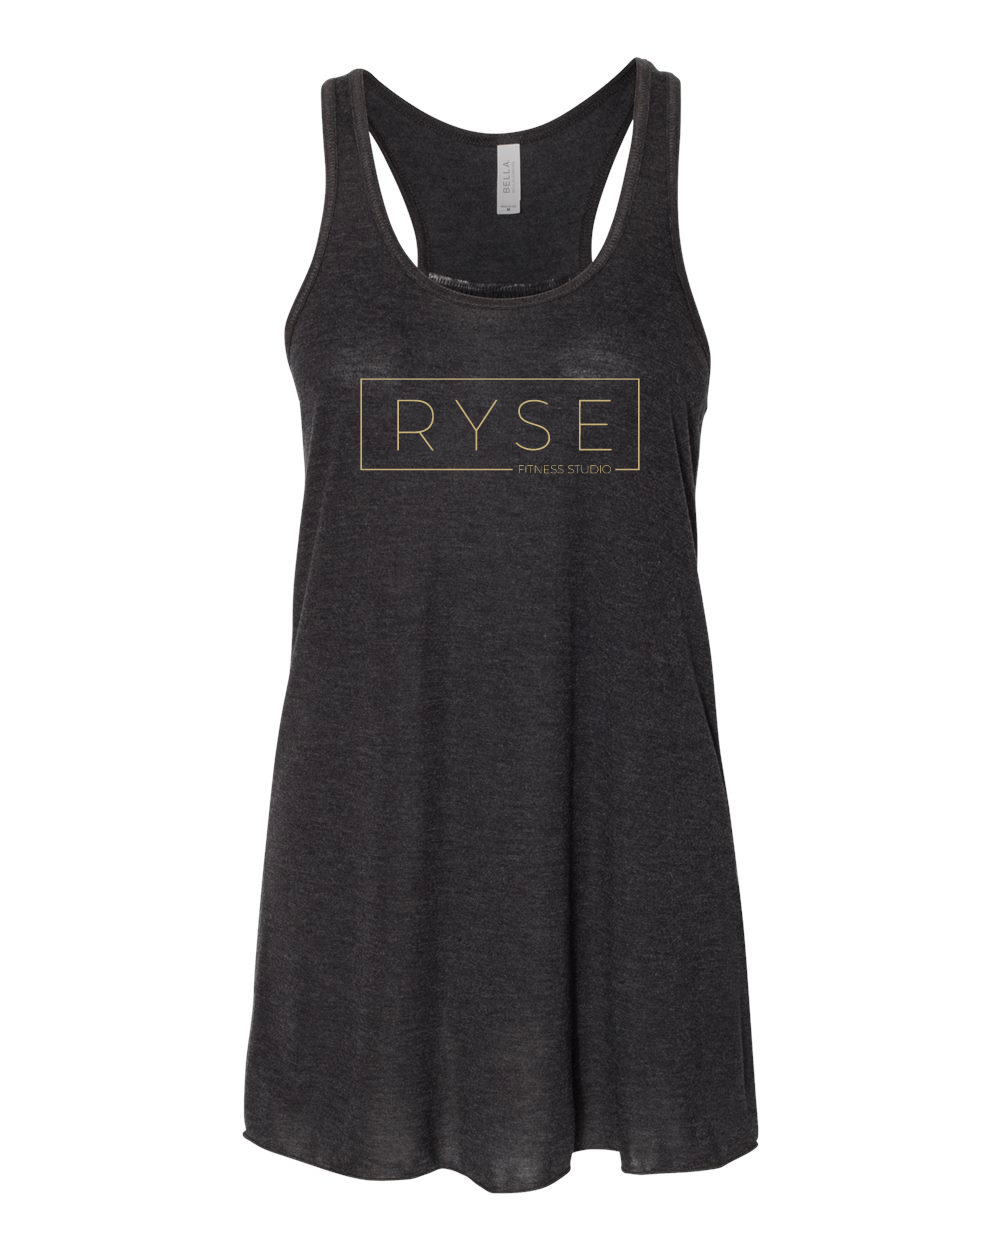 Ryse Fitness Tank Top + 1 Month Unlimited Pass